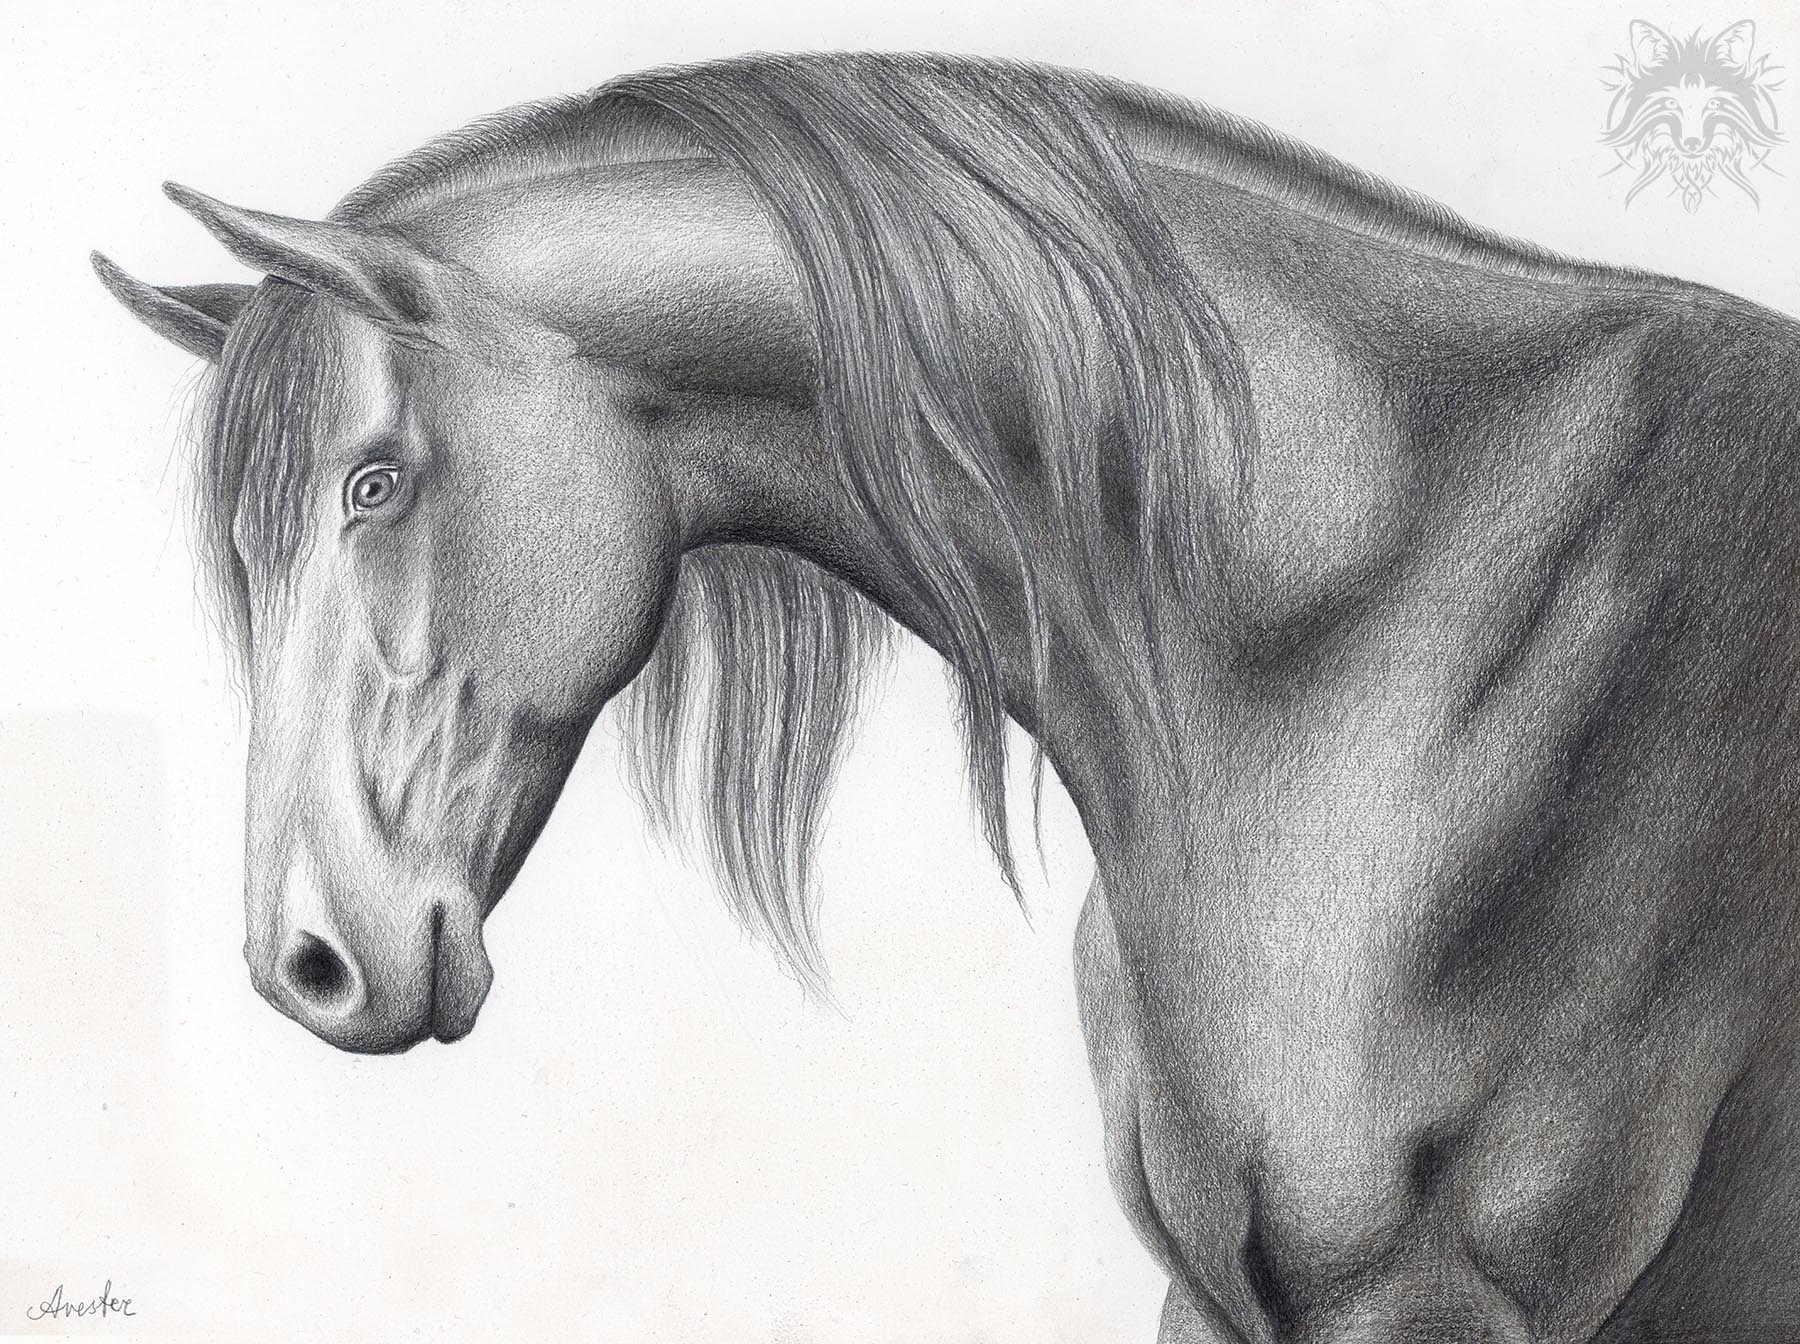 Metalpoint Drawing Horse Head Art of Andreas Avester